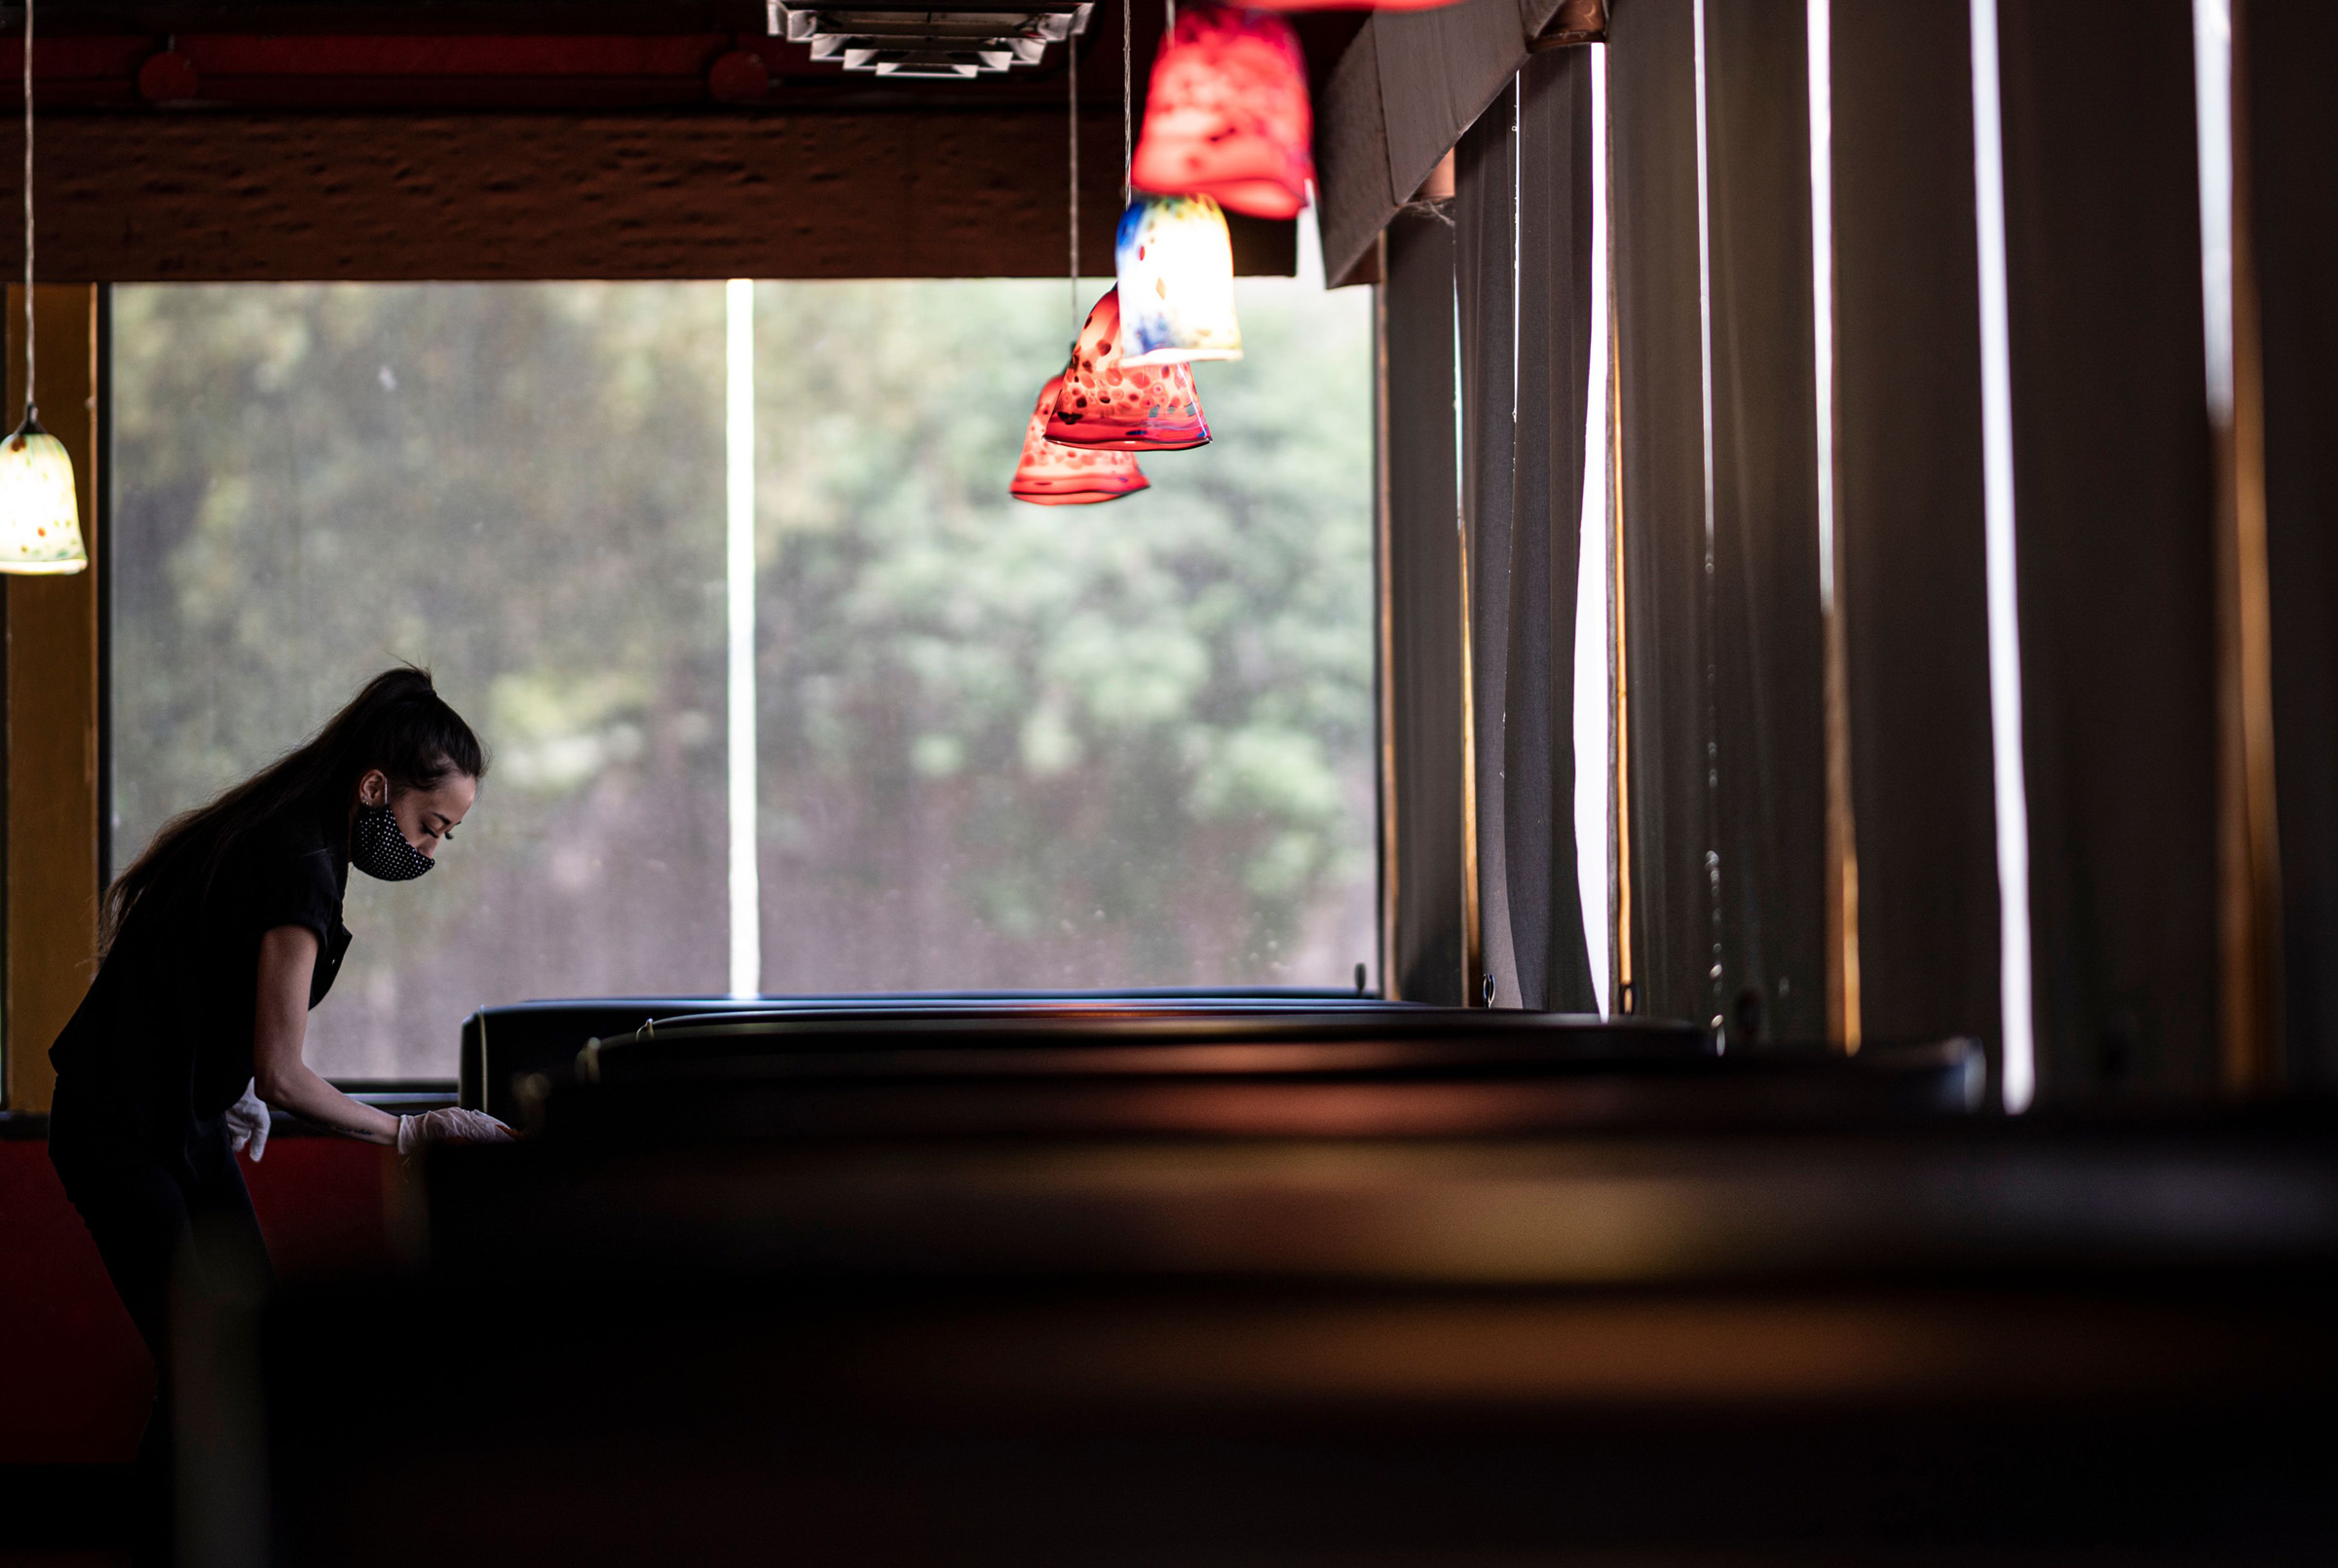 A waitress wearing a mask and gloves disinfects a table in a Restaurant on May 5, 2020 in Stillwater, Oklahoma. (Johannes Eisele—AFP/Getty Images)